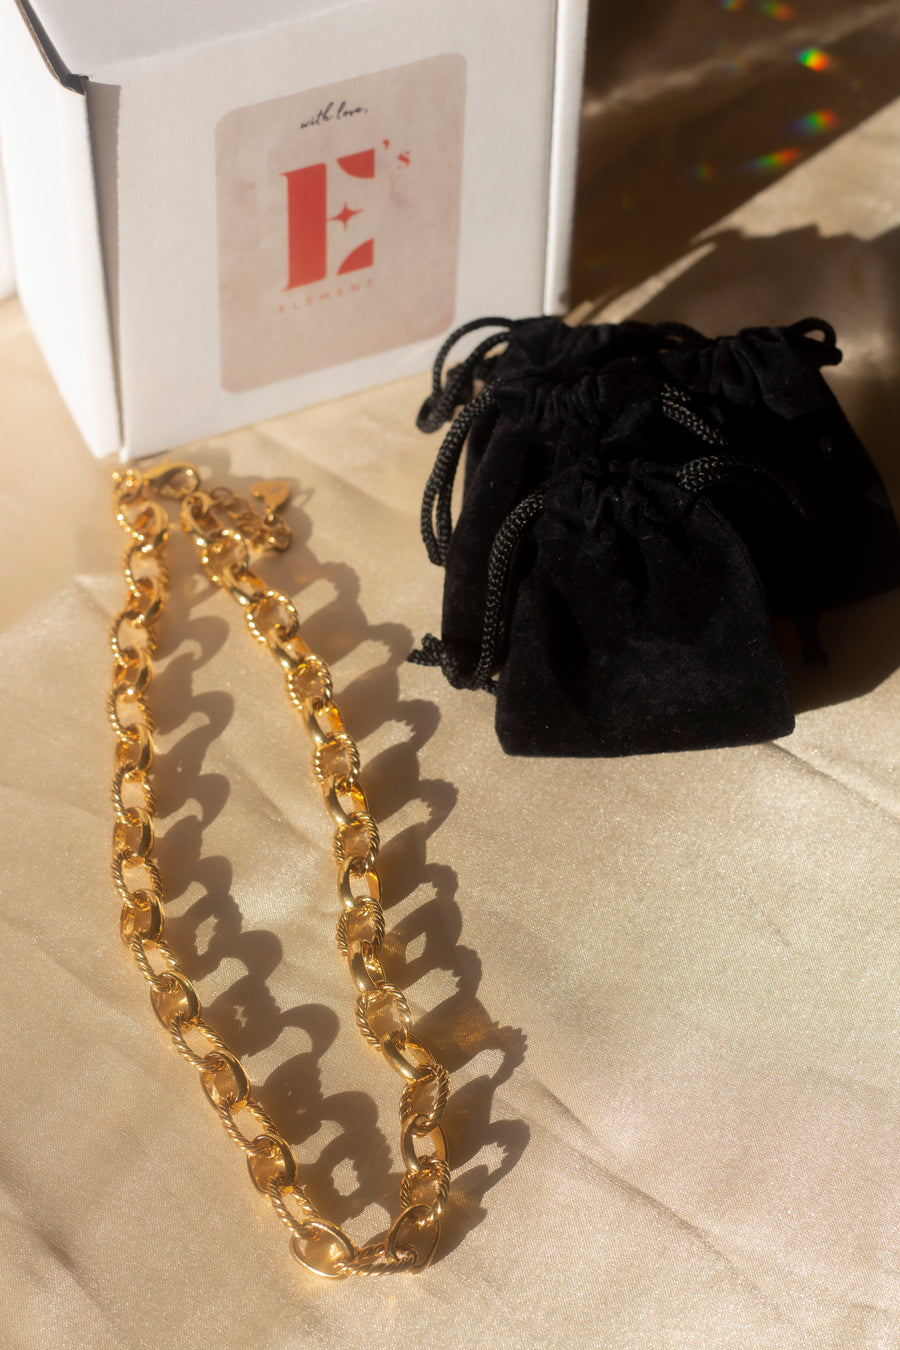 18k gold chain necklace with a rope pattern. The chain is placed on a beige cloth. On the top left is a box with the E's Element logo in red. On the right are closed black pouches. Rope Link Signature Chain by E's Element.